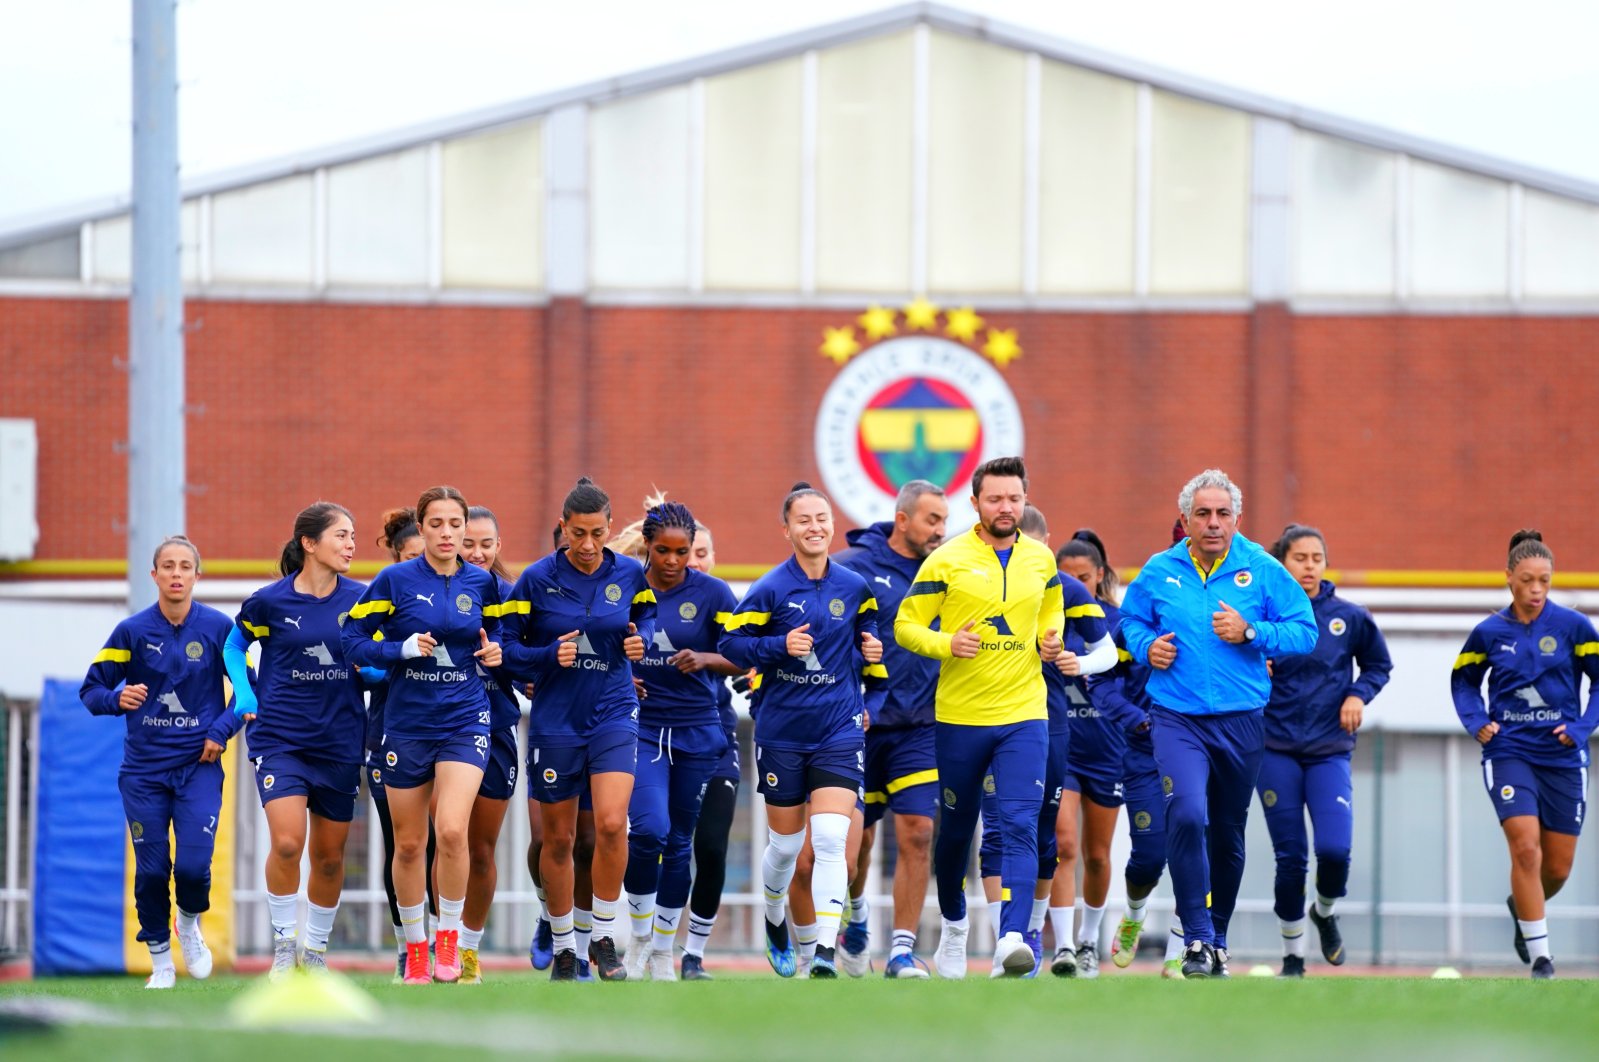 Fenerbahçe Women&#039;s Football Athletic Performance Coach Samet Kösemen (C) and players work out in this undated photo. (Photo courtesy by Samet Kösemen)